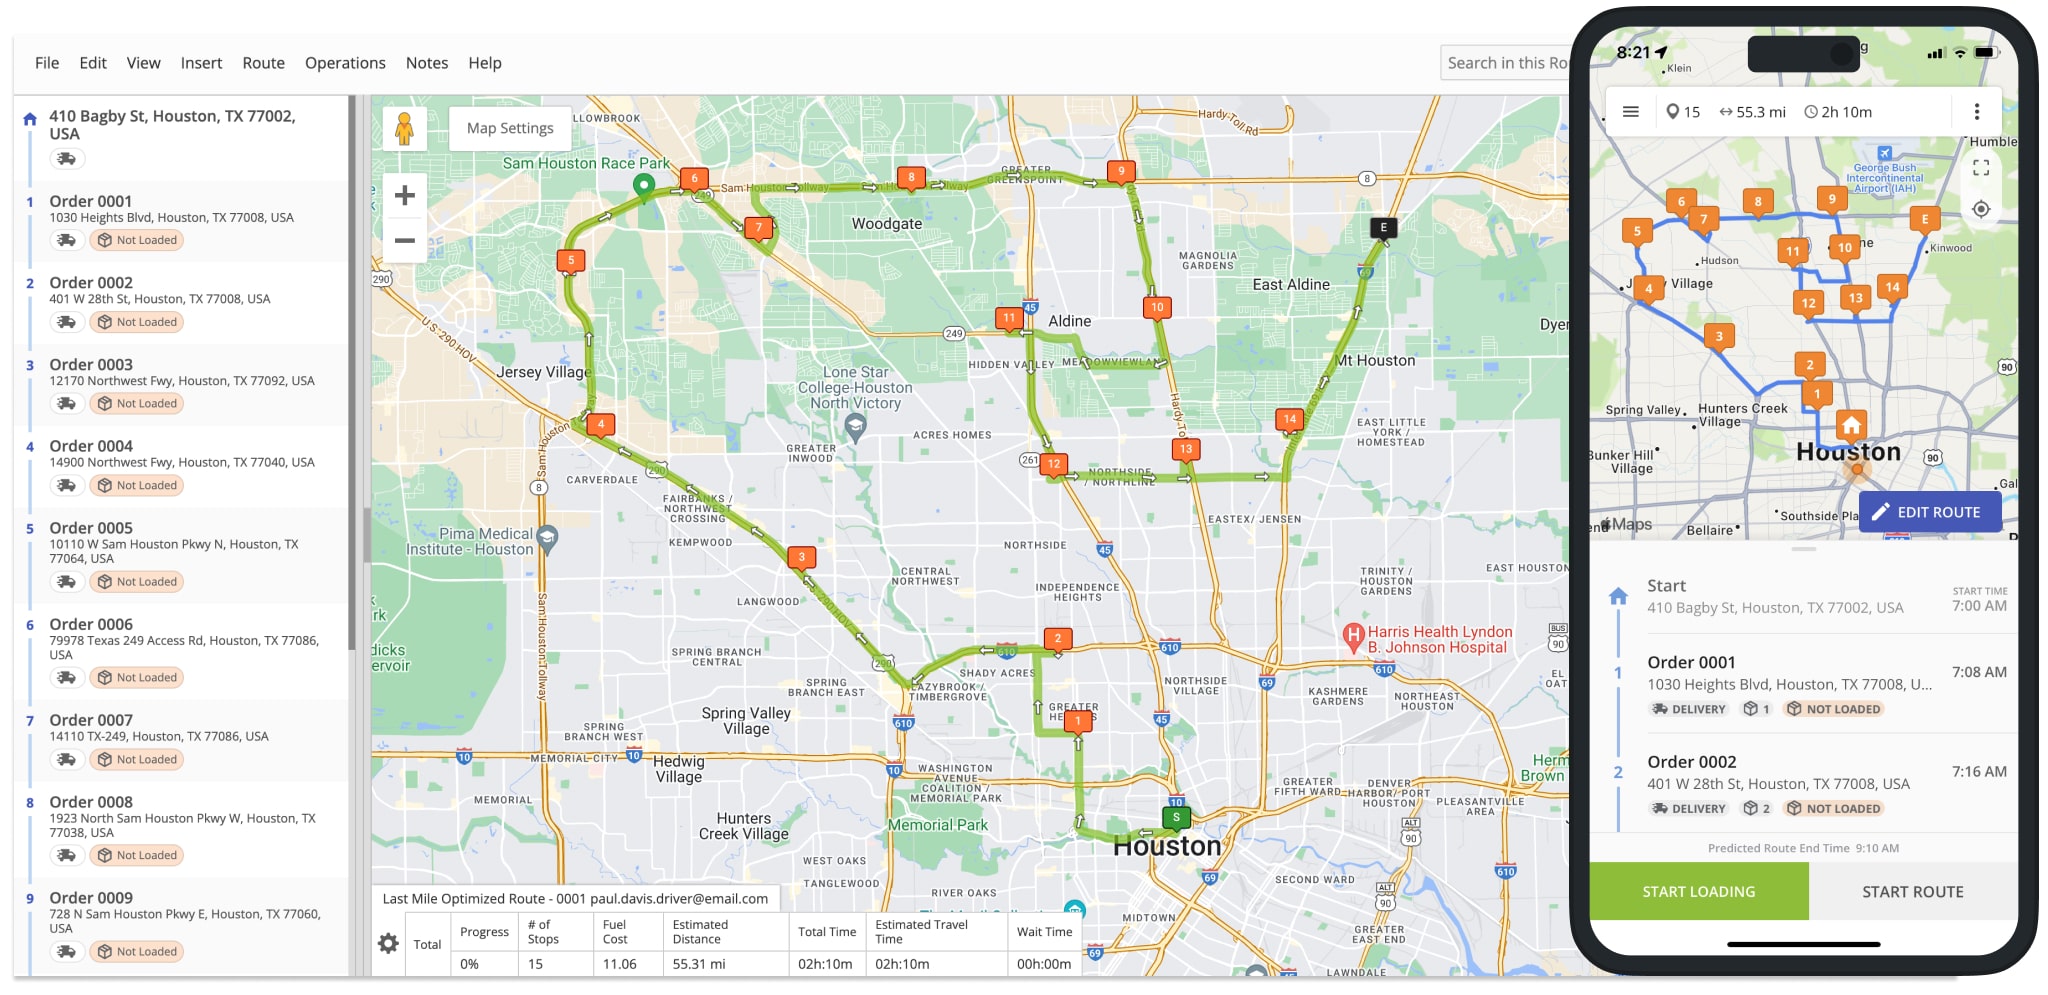 Dispatch routes with orders to driver apps and track order route progress in real-time.